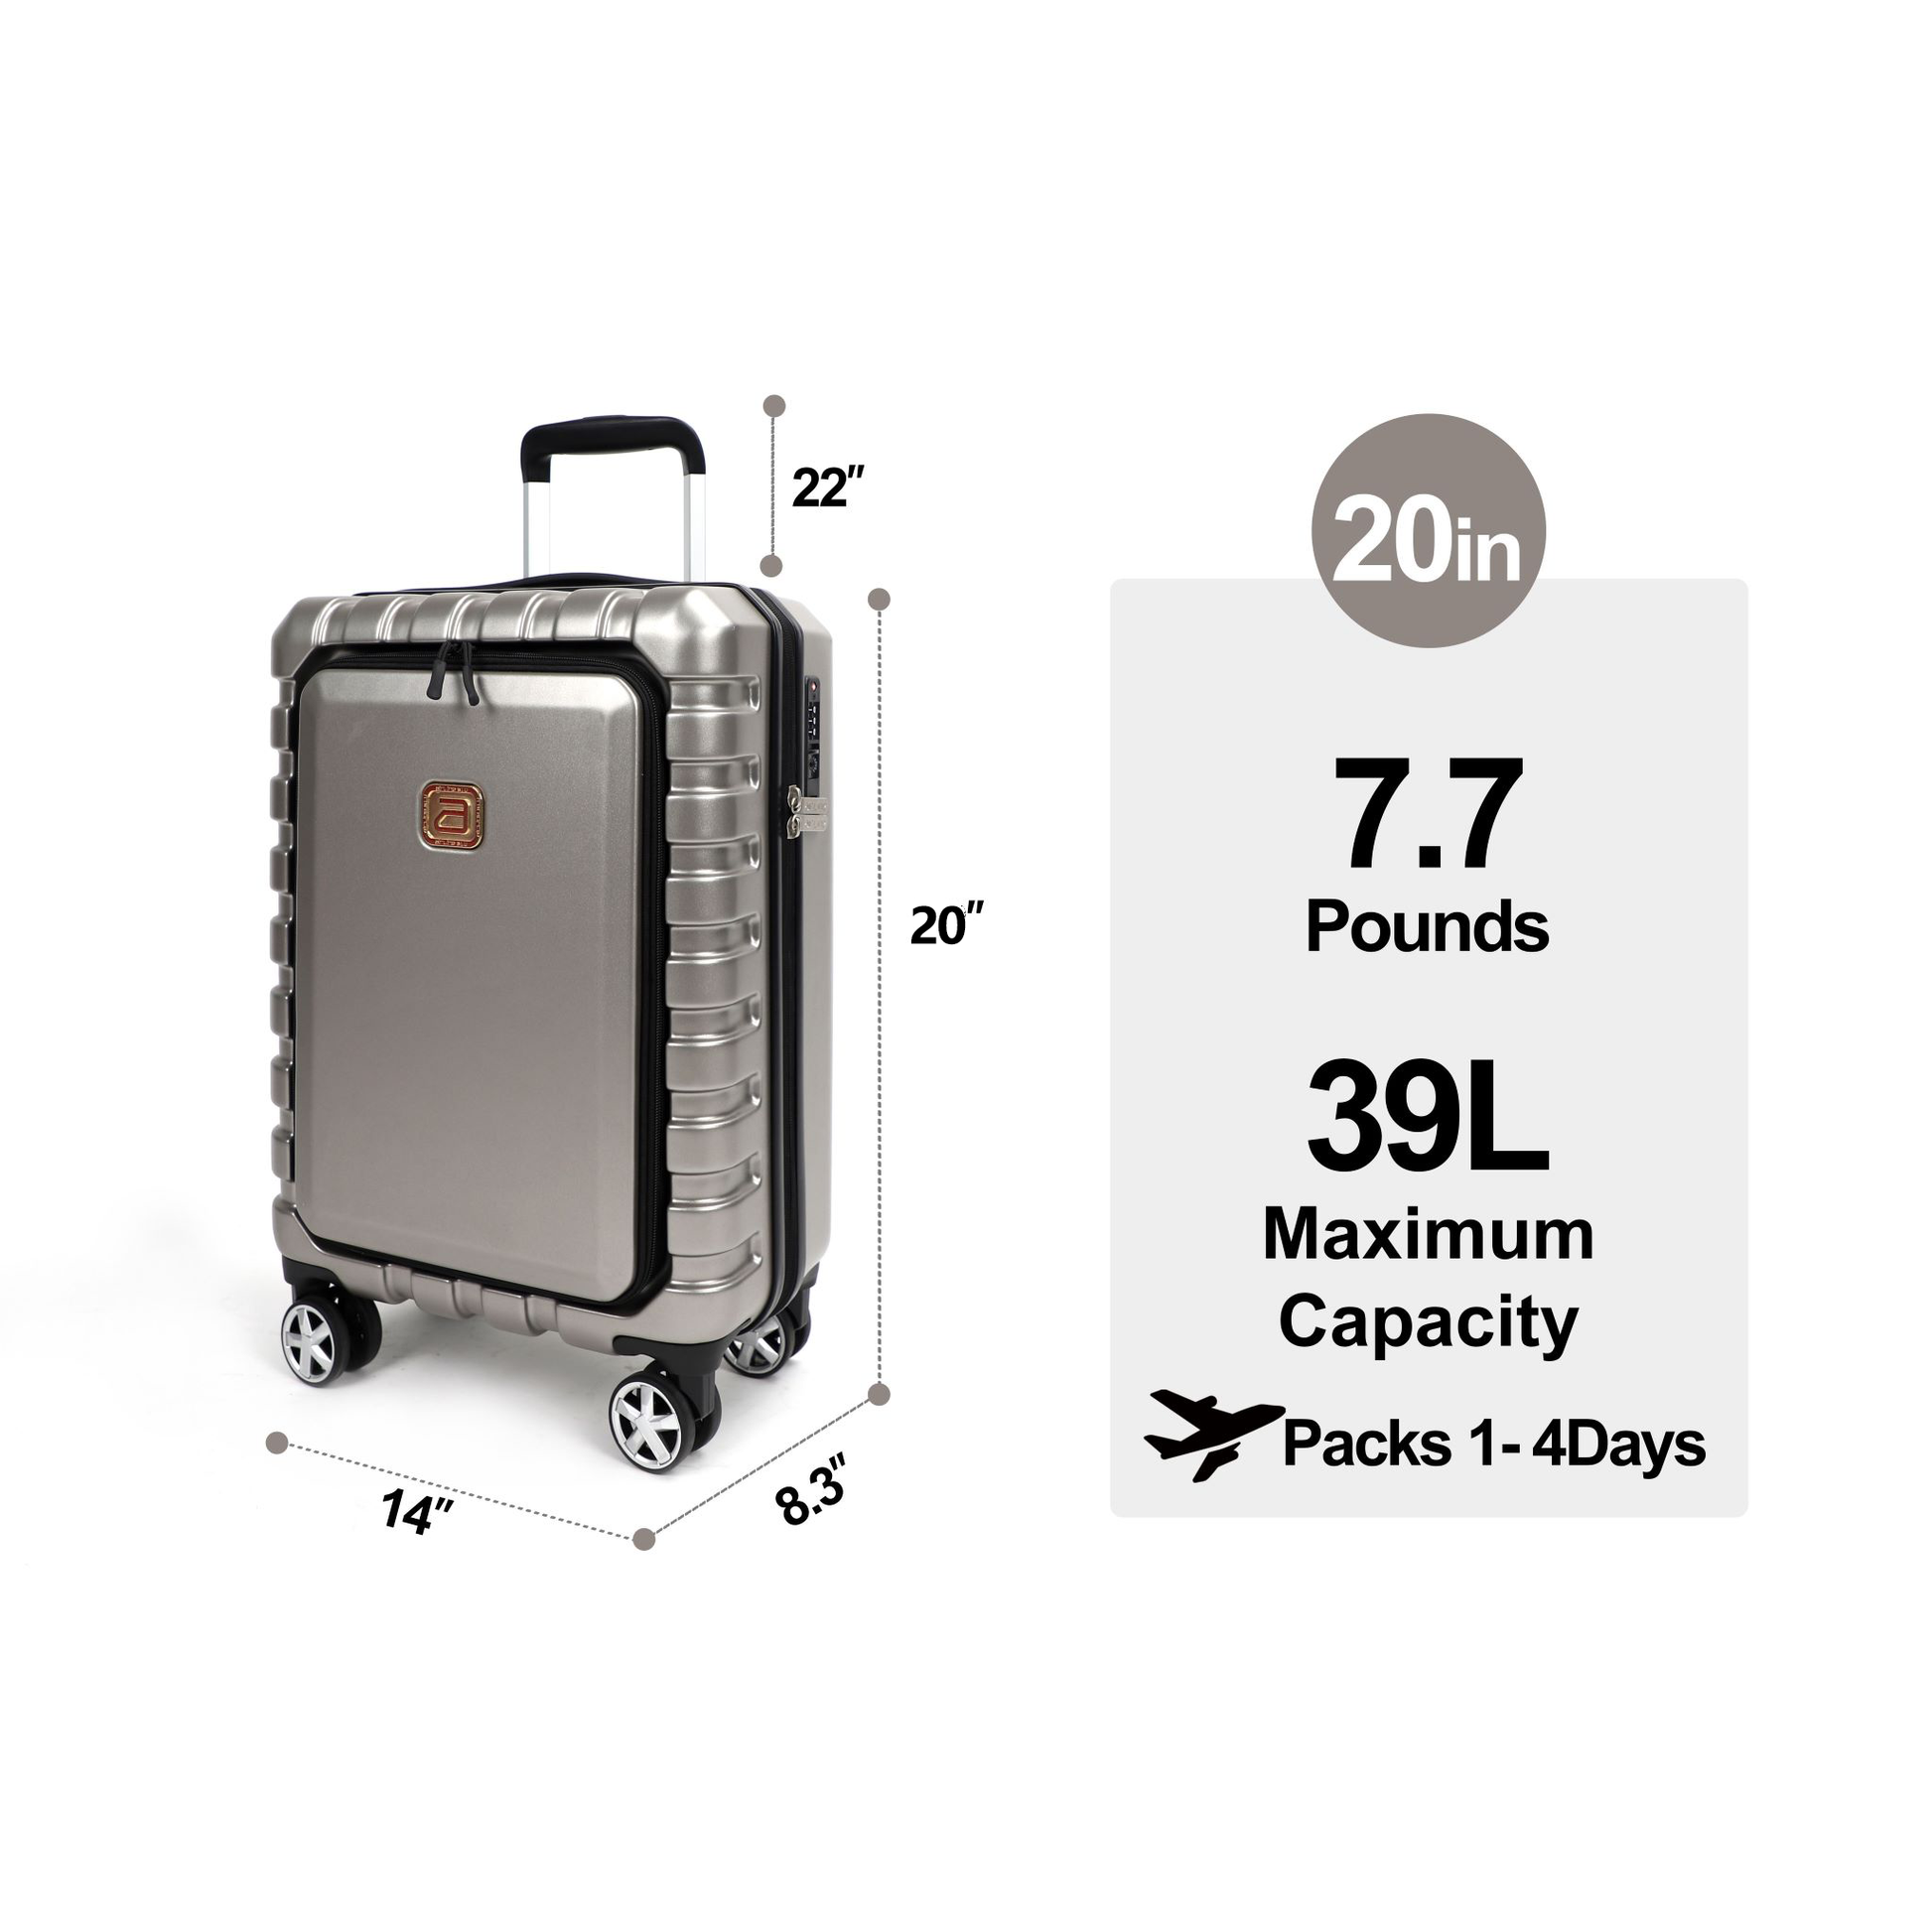 Airline_Carry_On_Luggage_iron_grey_Size_T1978155101